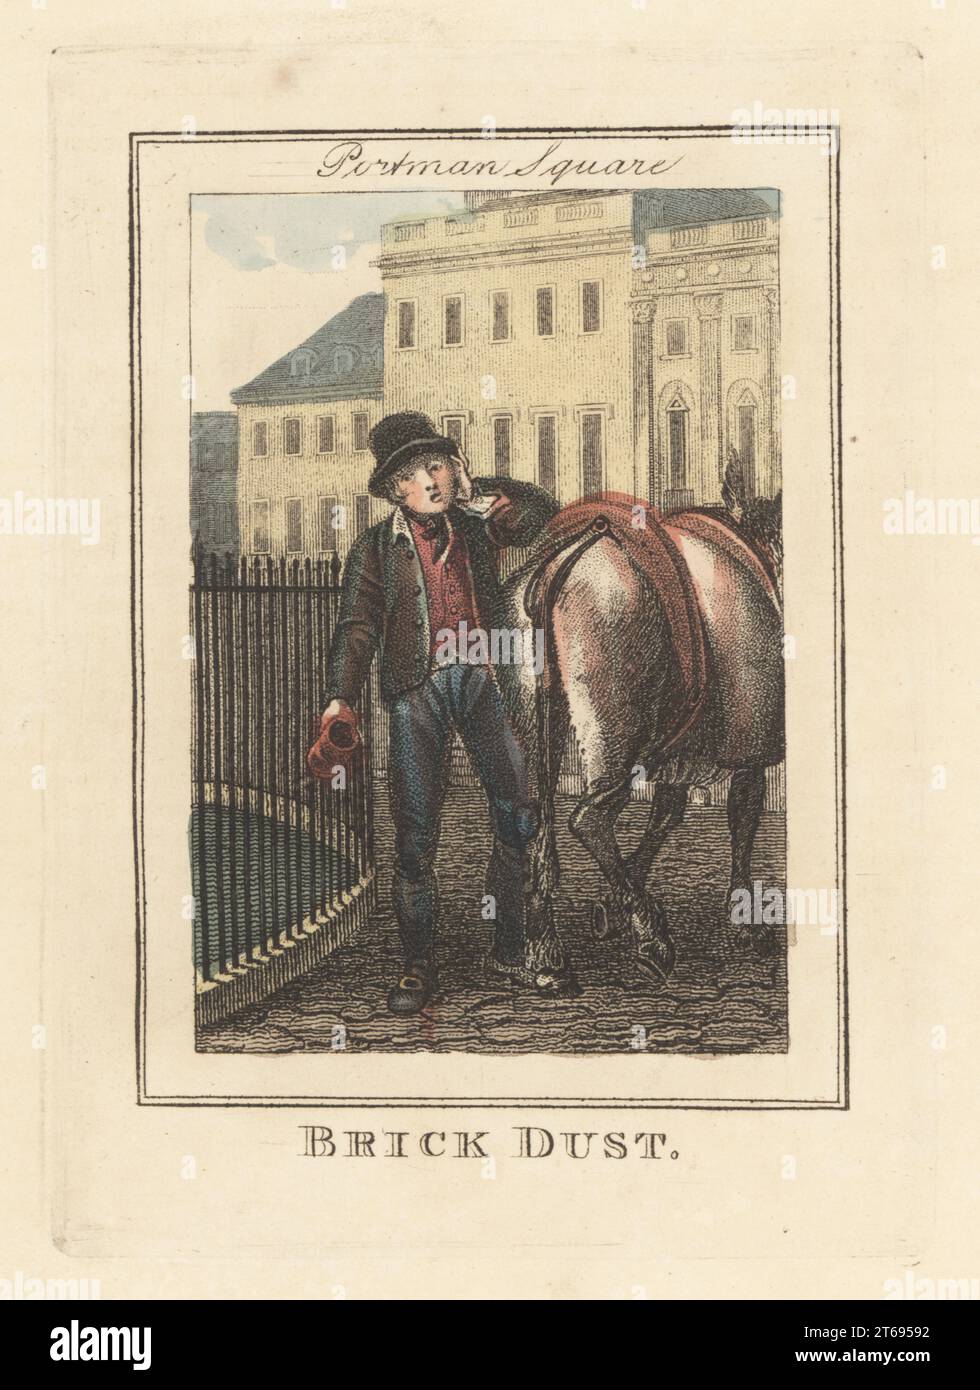 Brick-dust seller with donkey in Portman Square. In top hat, jacket, waistcoat, and breeches, with sack of brick dust used for knife-cleaning. In the background, houses of Blue Stockings Society salonist Lady Elizabeth Montagu, the Duke of Athol and Hamilton Nesbitt. Handcoloured copperplate engraving by Edward Edwards after an illustration by William Marshall Craig from Description of the Plates Representing the Itinerant Traders of London, Richard Phillips, No. 71 St Pauls Churchyard, London, 1805. Stock Photo